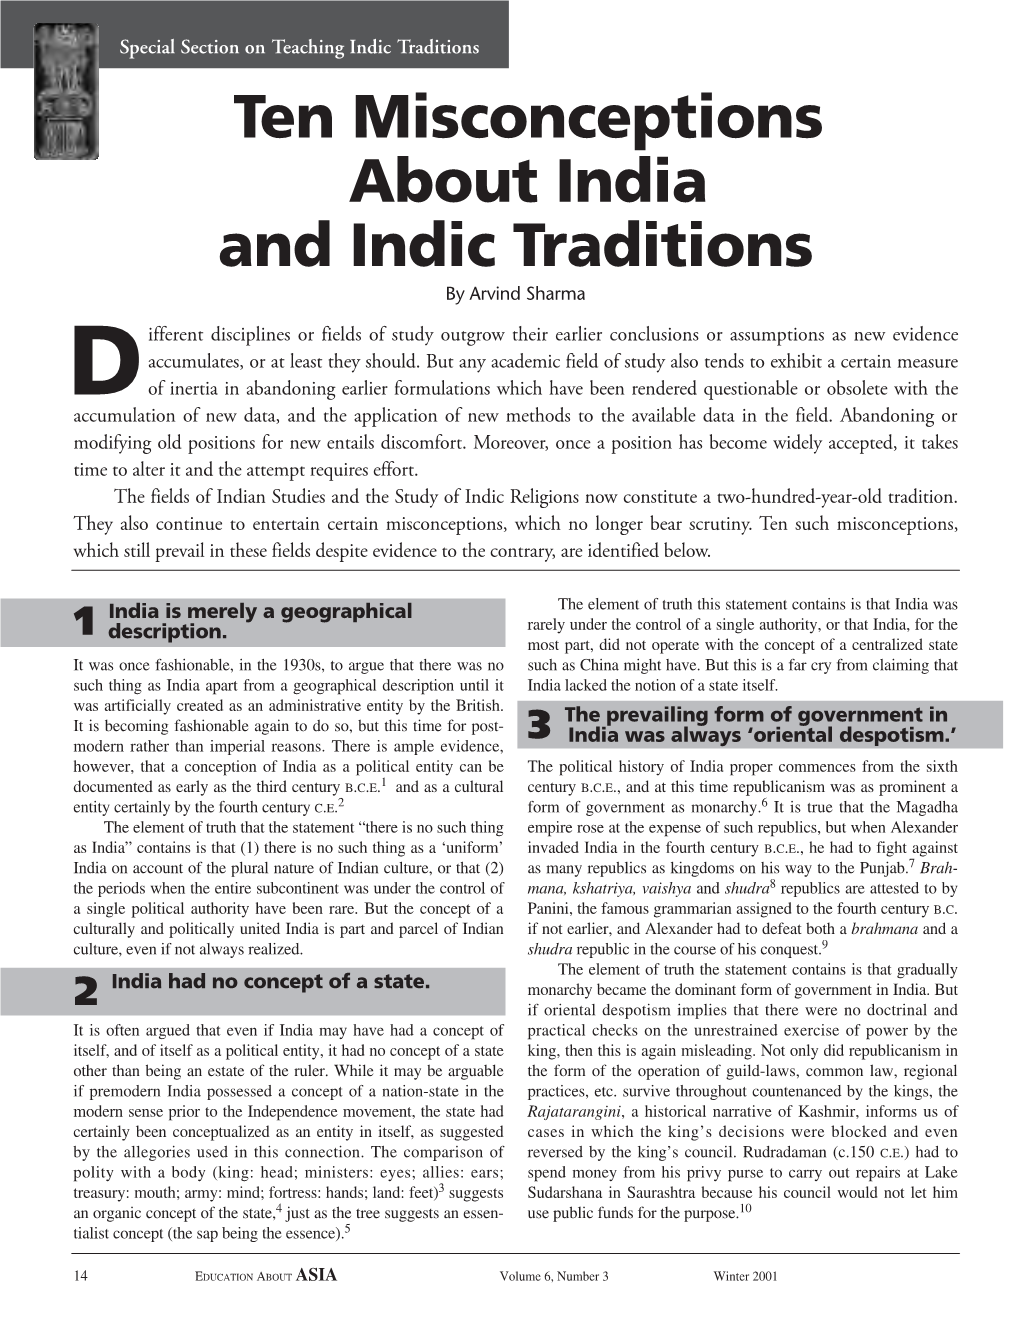 Ten Misconceptions About India and Indic Traditions by Arvind Sharma